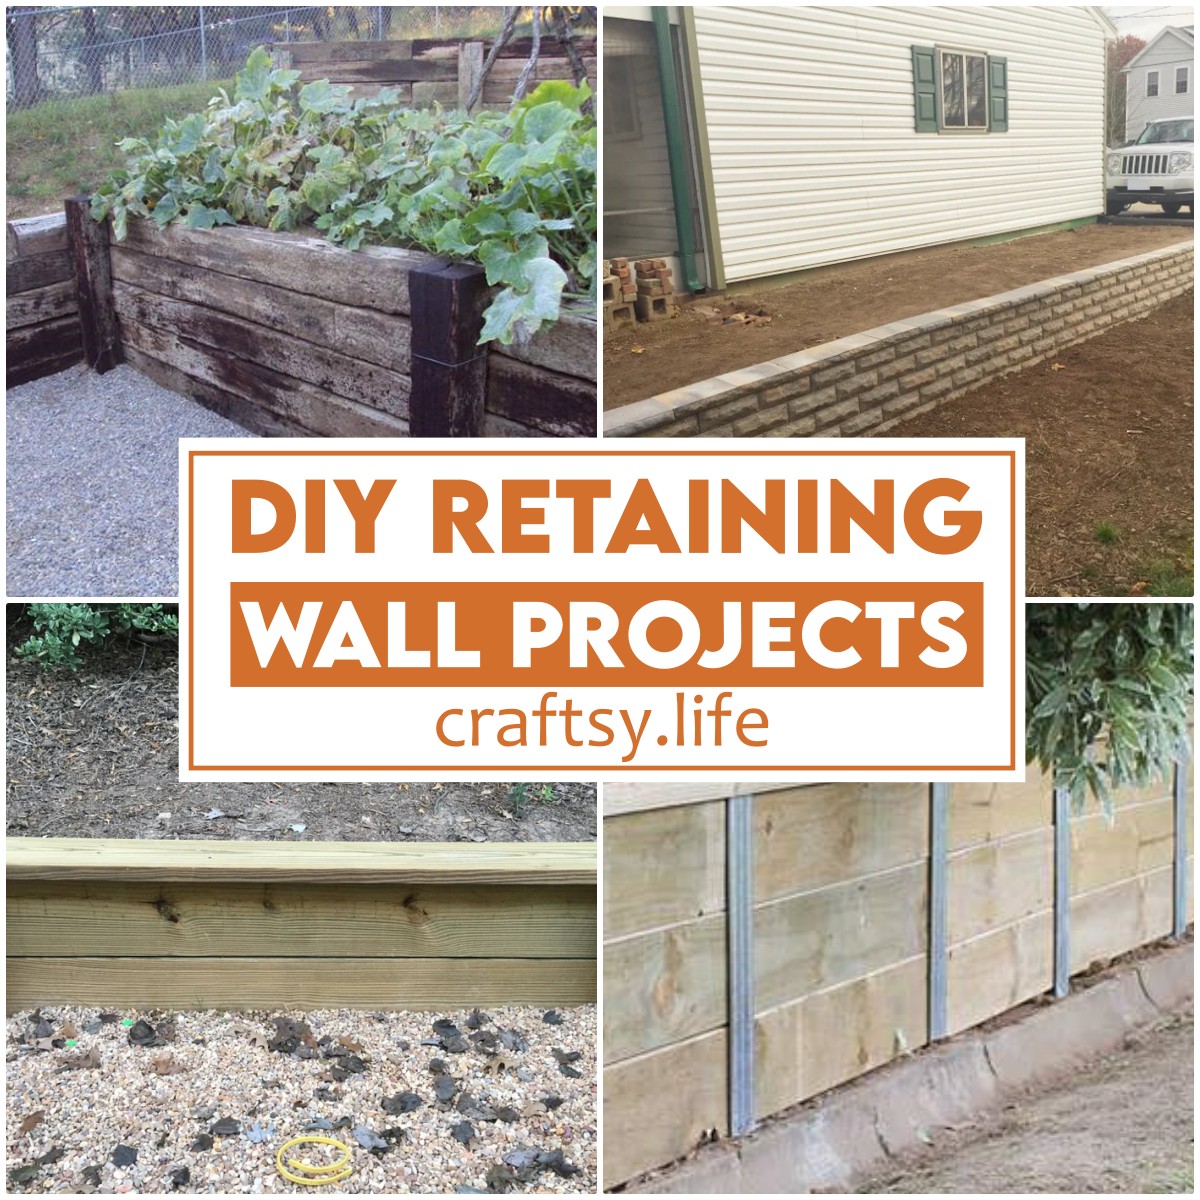 DIY Retaining Wall Projects